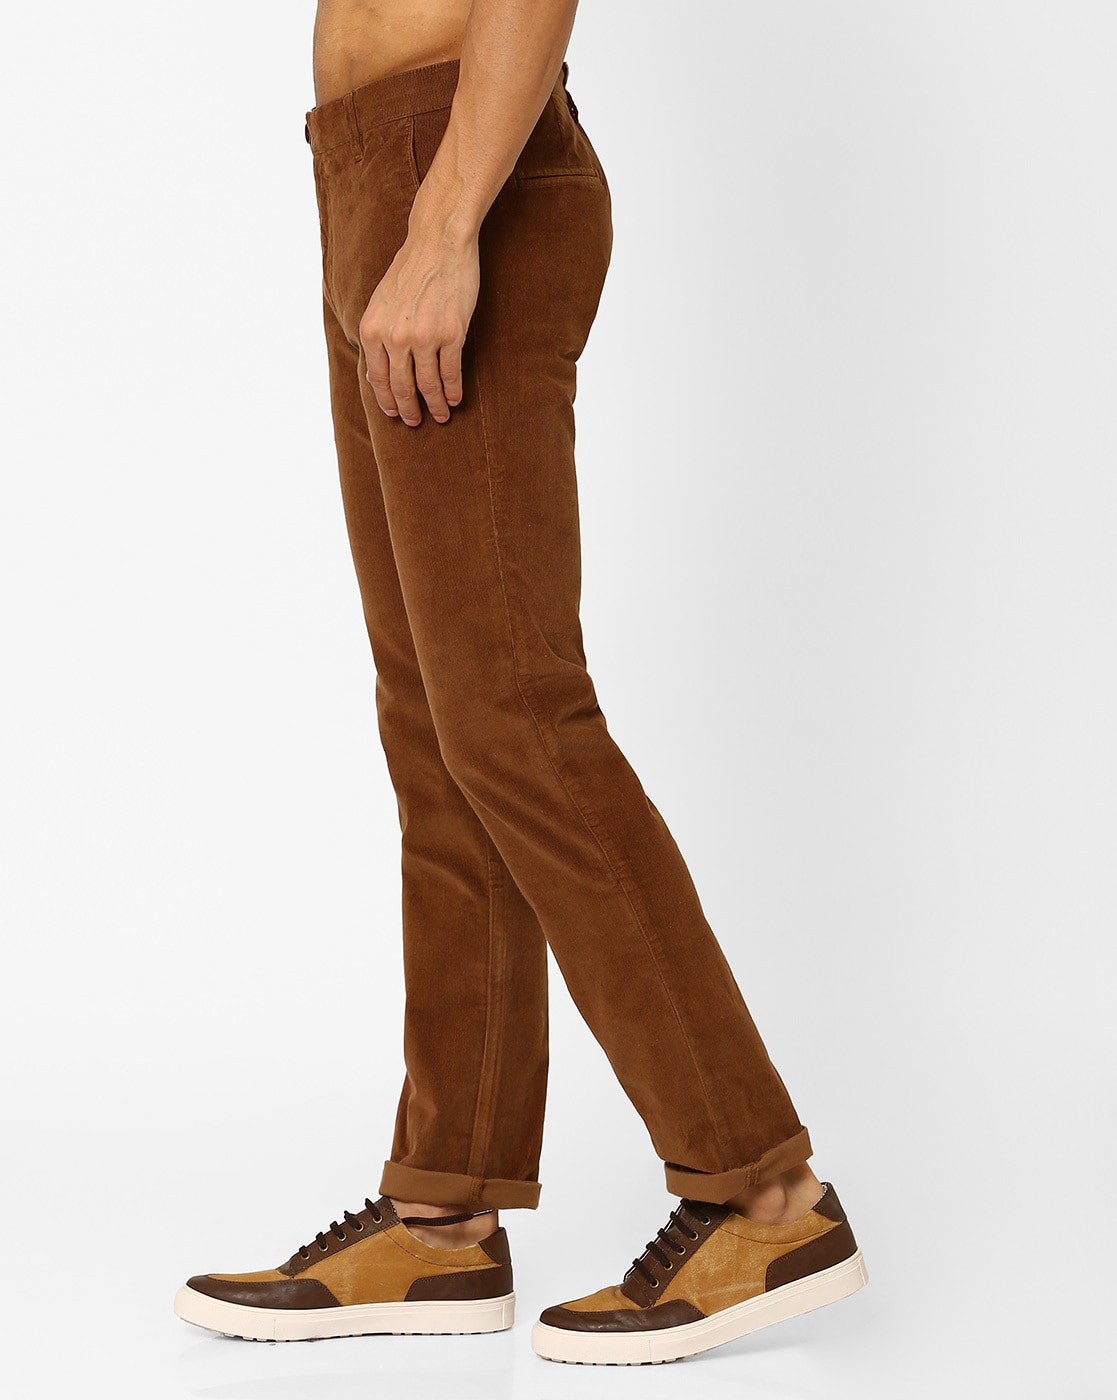 Classic Mens Corduroy Trousers  Needlecord  Fine Cord Trousers